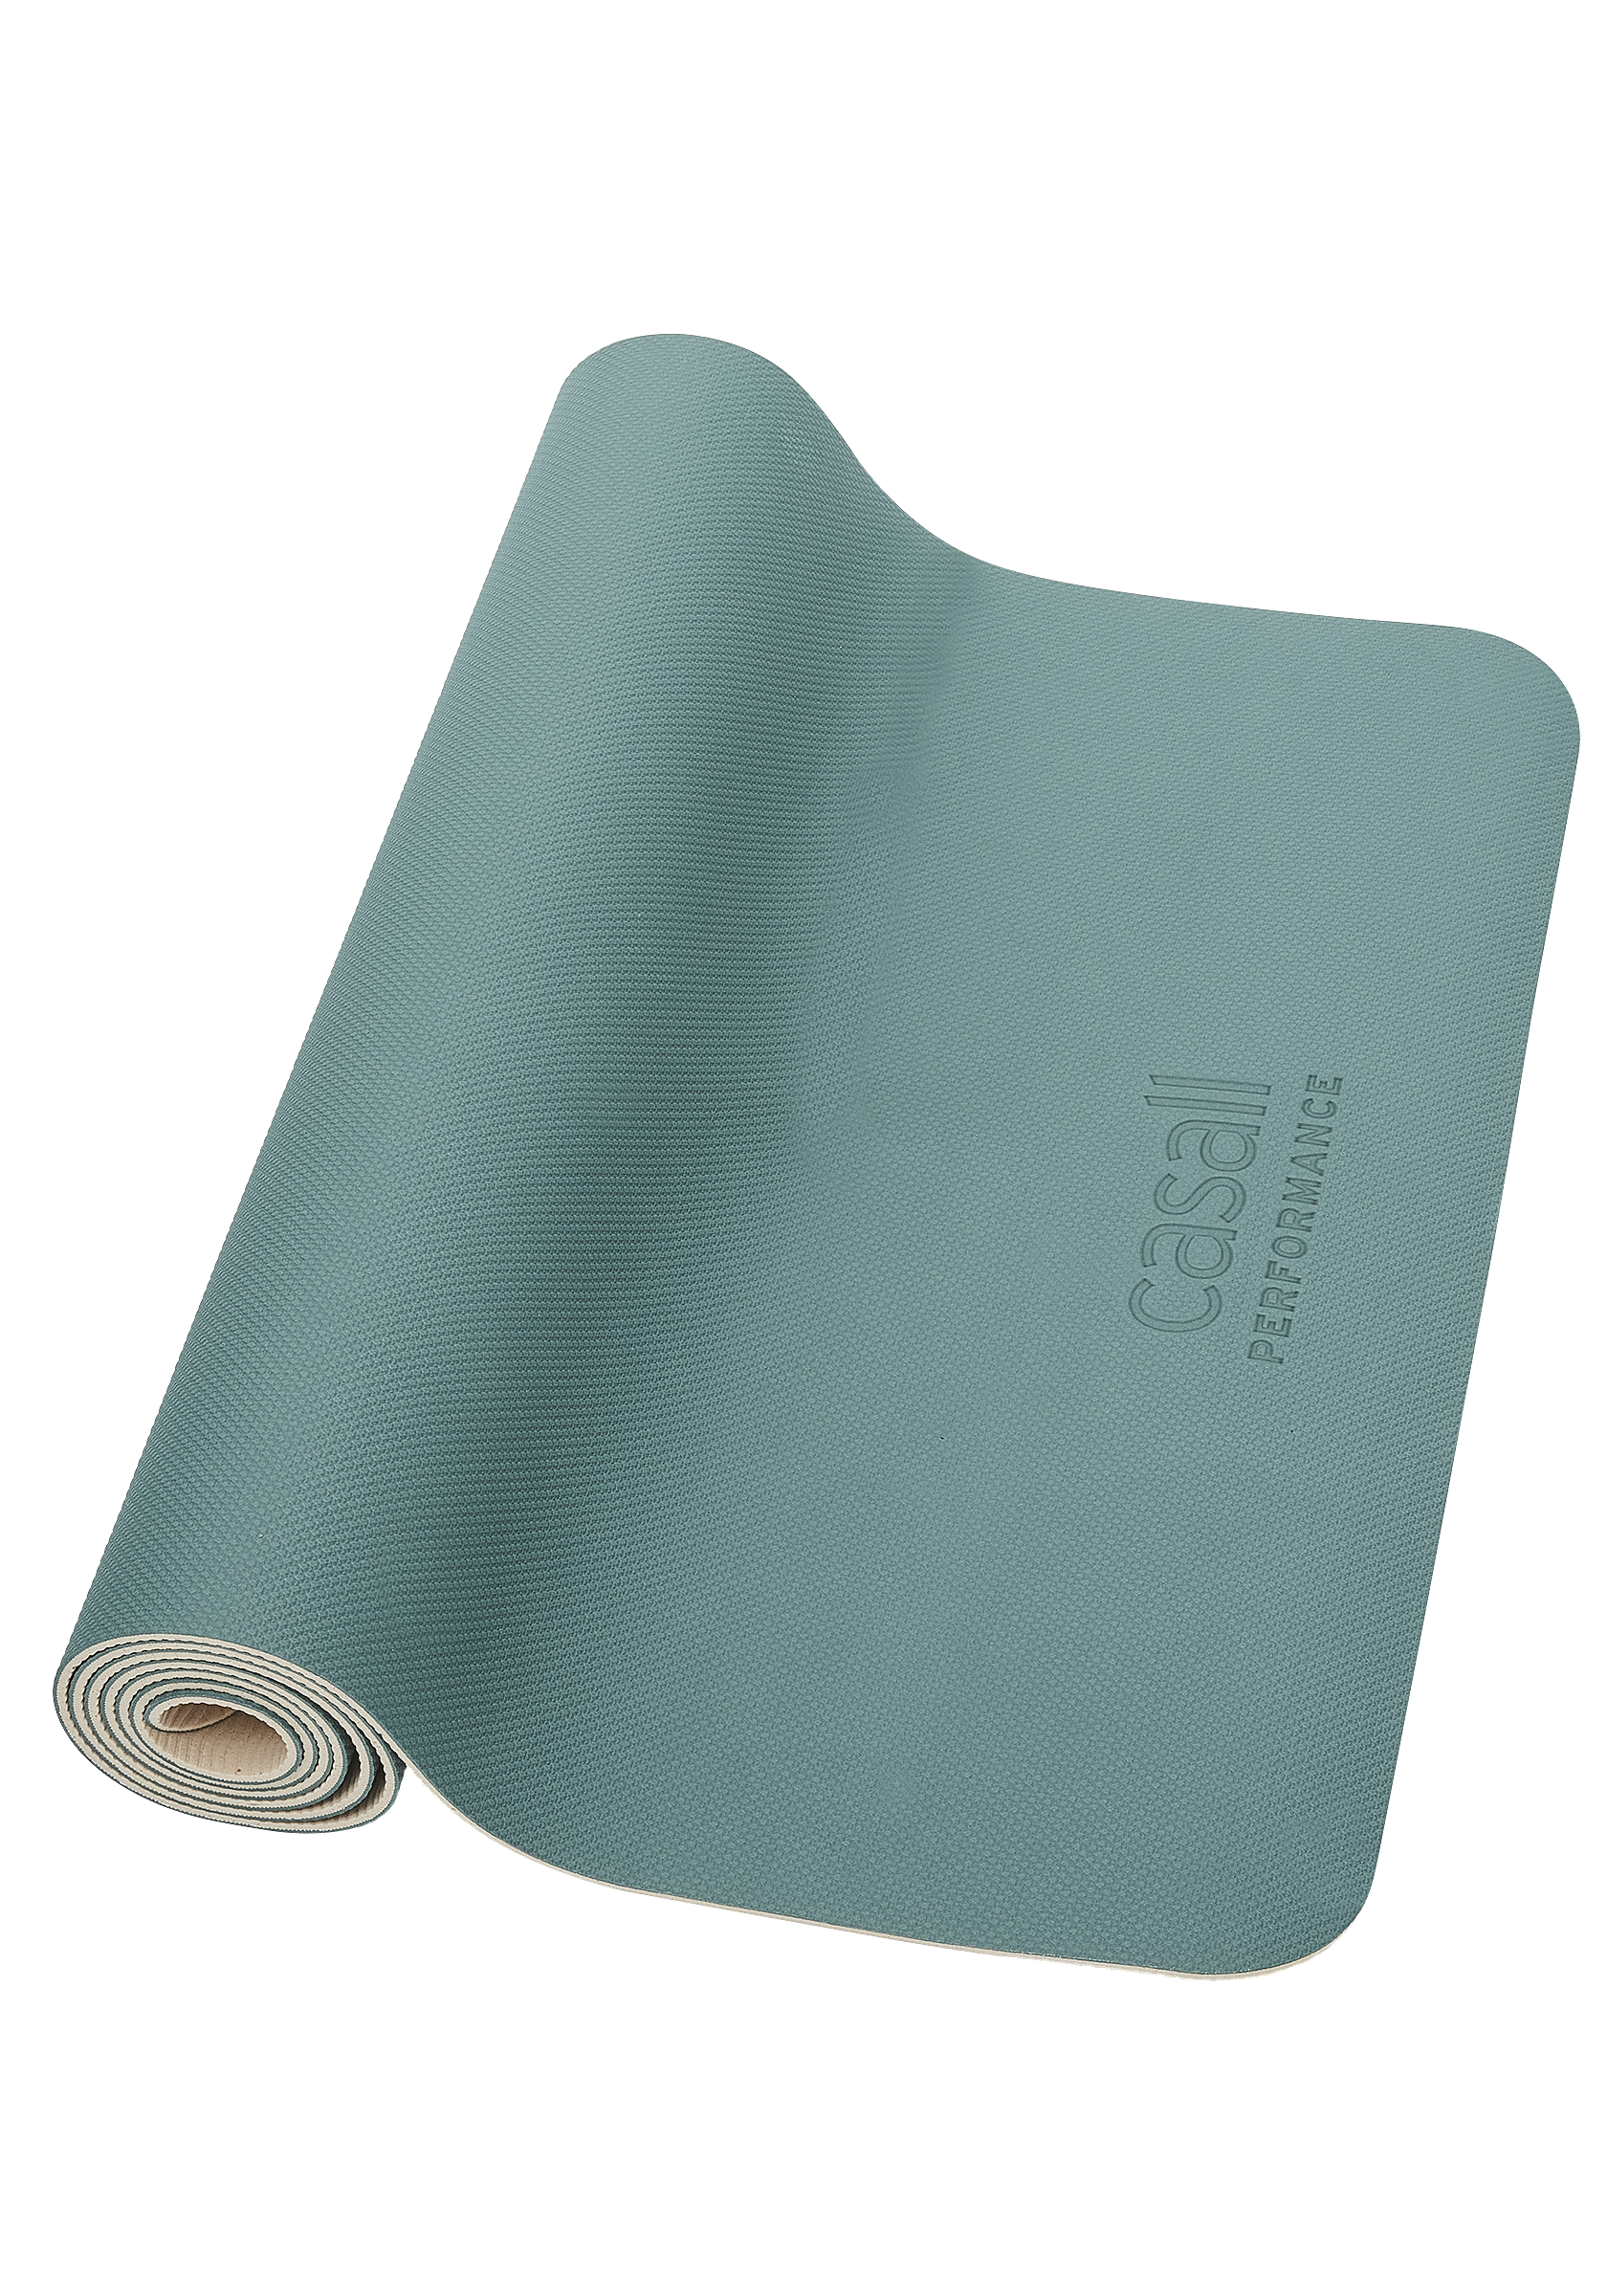 PRF ECO Bamboo Exercise mat 4mm - Green